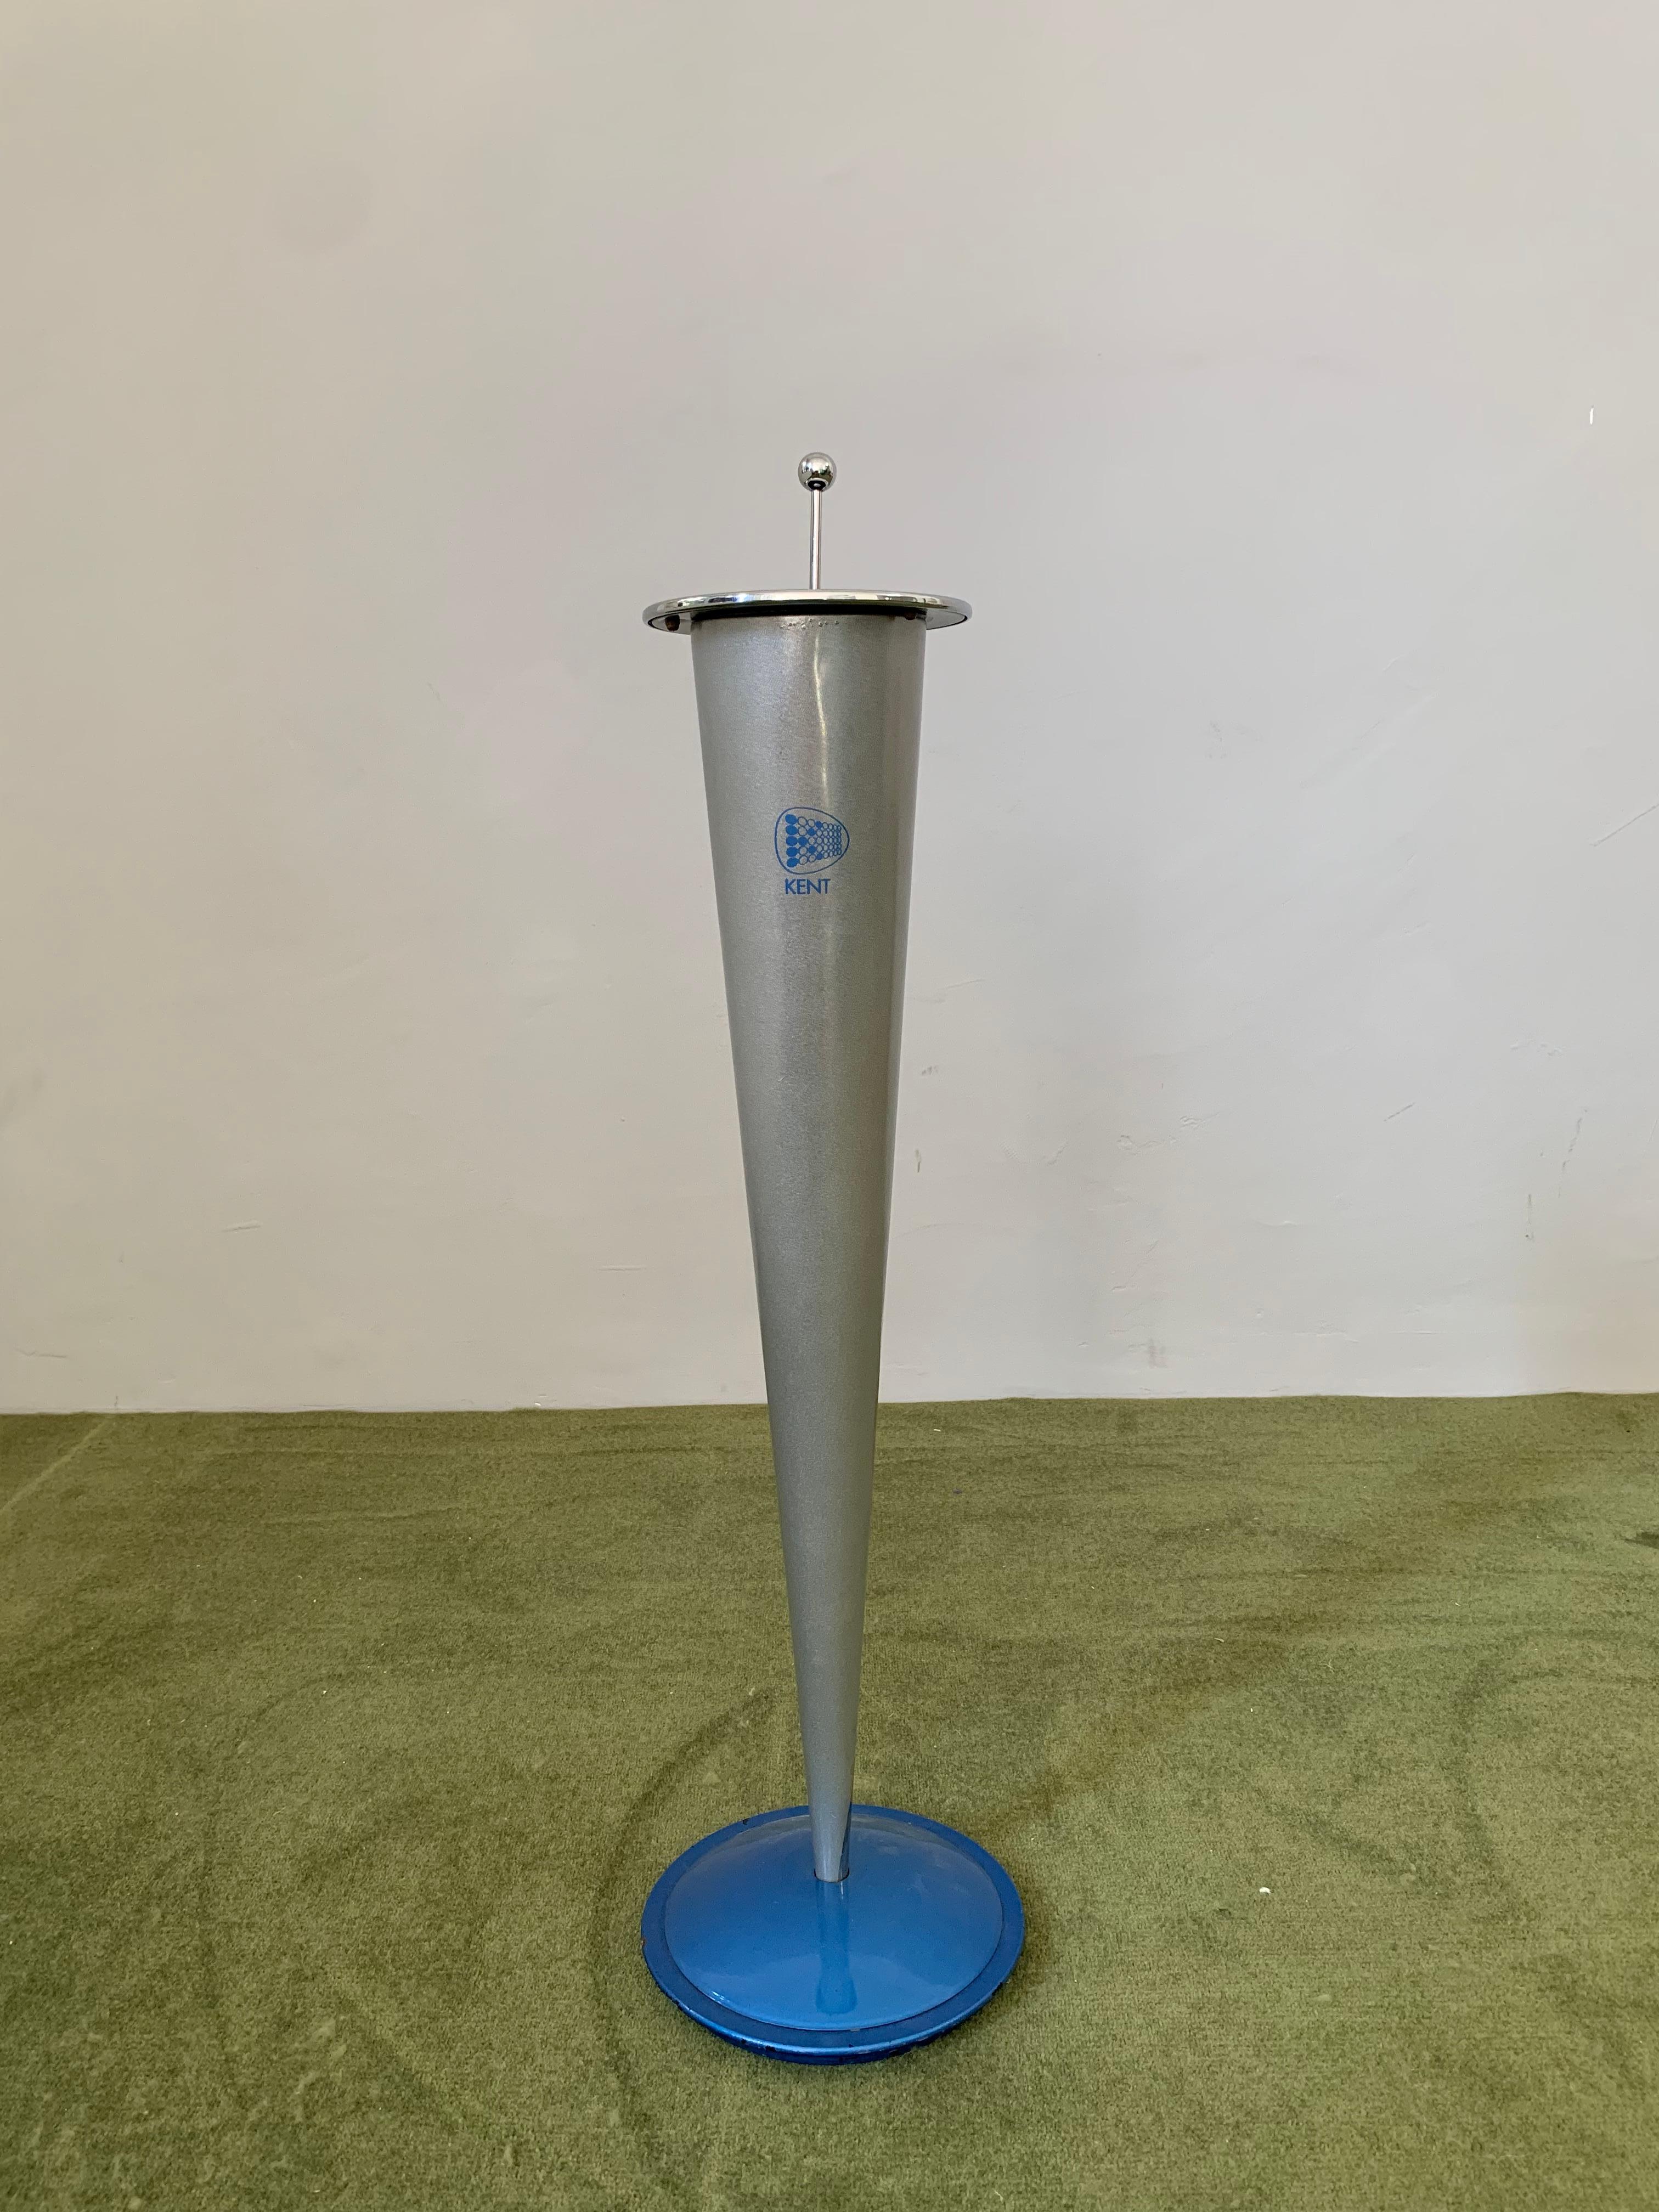 Very unique and extremely rare standing ashtray by the famous American cigarette brand, Kent. 
The height of this cone-shaped object is 70 cm, the maximum diameter is 18 cm. The ashtray is made of steel, the lowest part has a gentle plastic coating